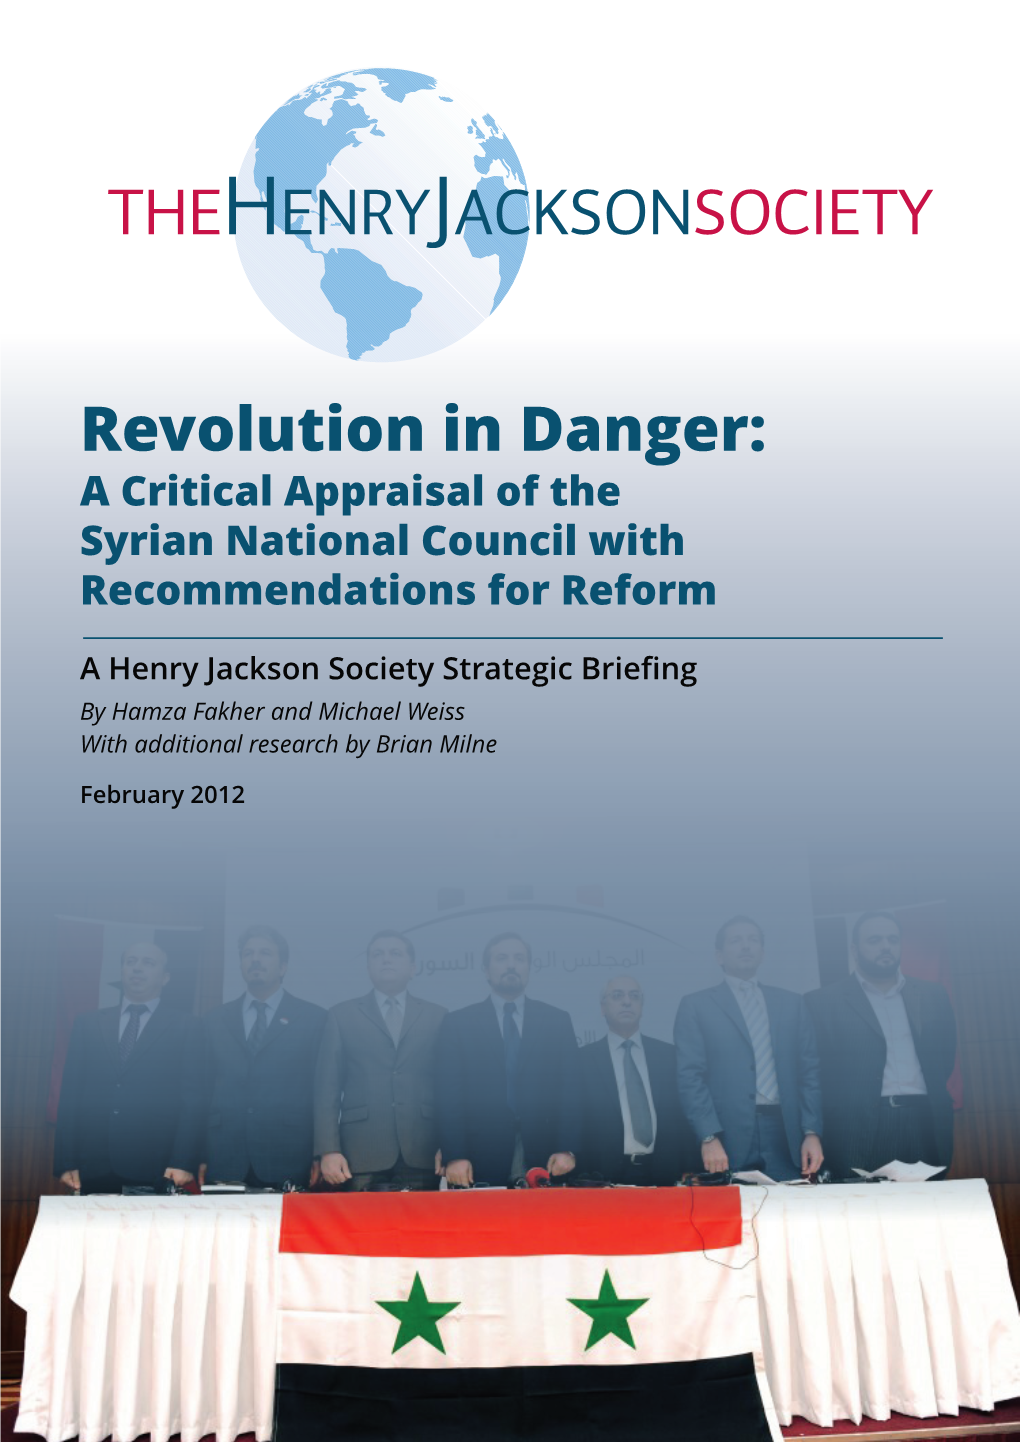 Revolution in Danger: a Critical Appraisal of the Syrian National Council with Recommendations for Reform